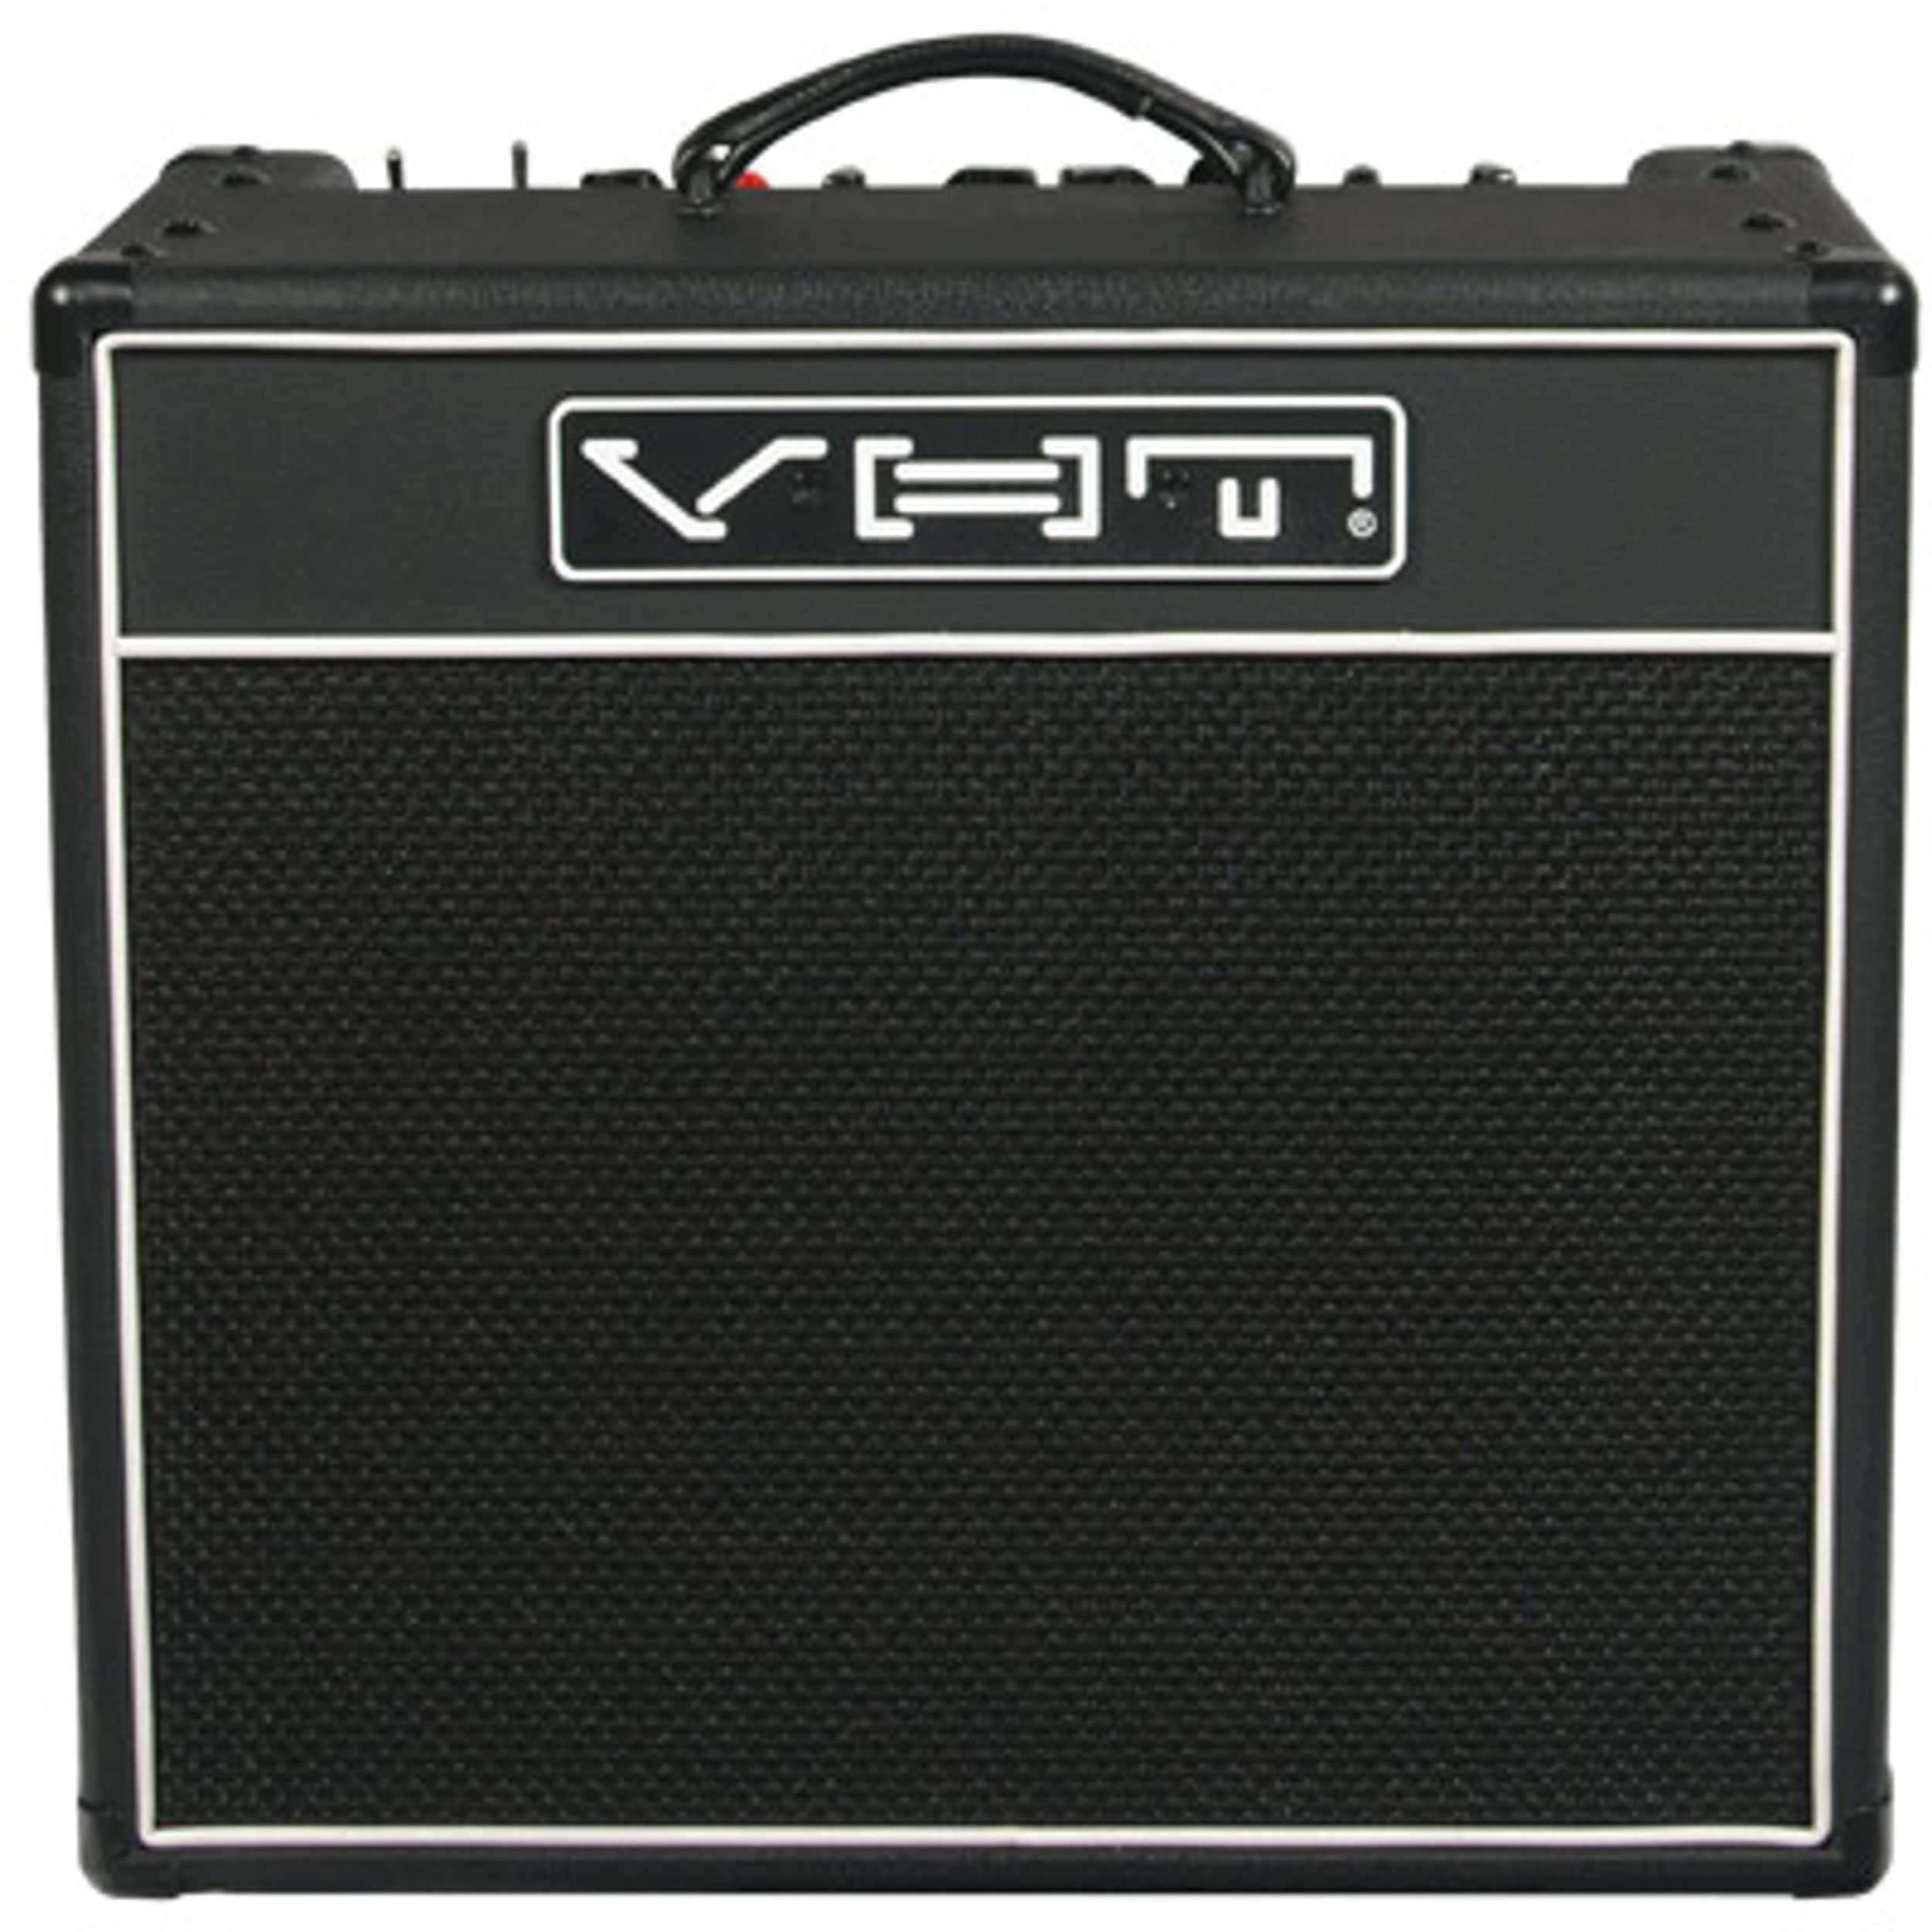 VHT Special 12/20 RT Amp Review